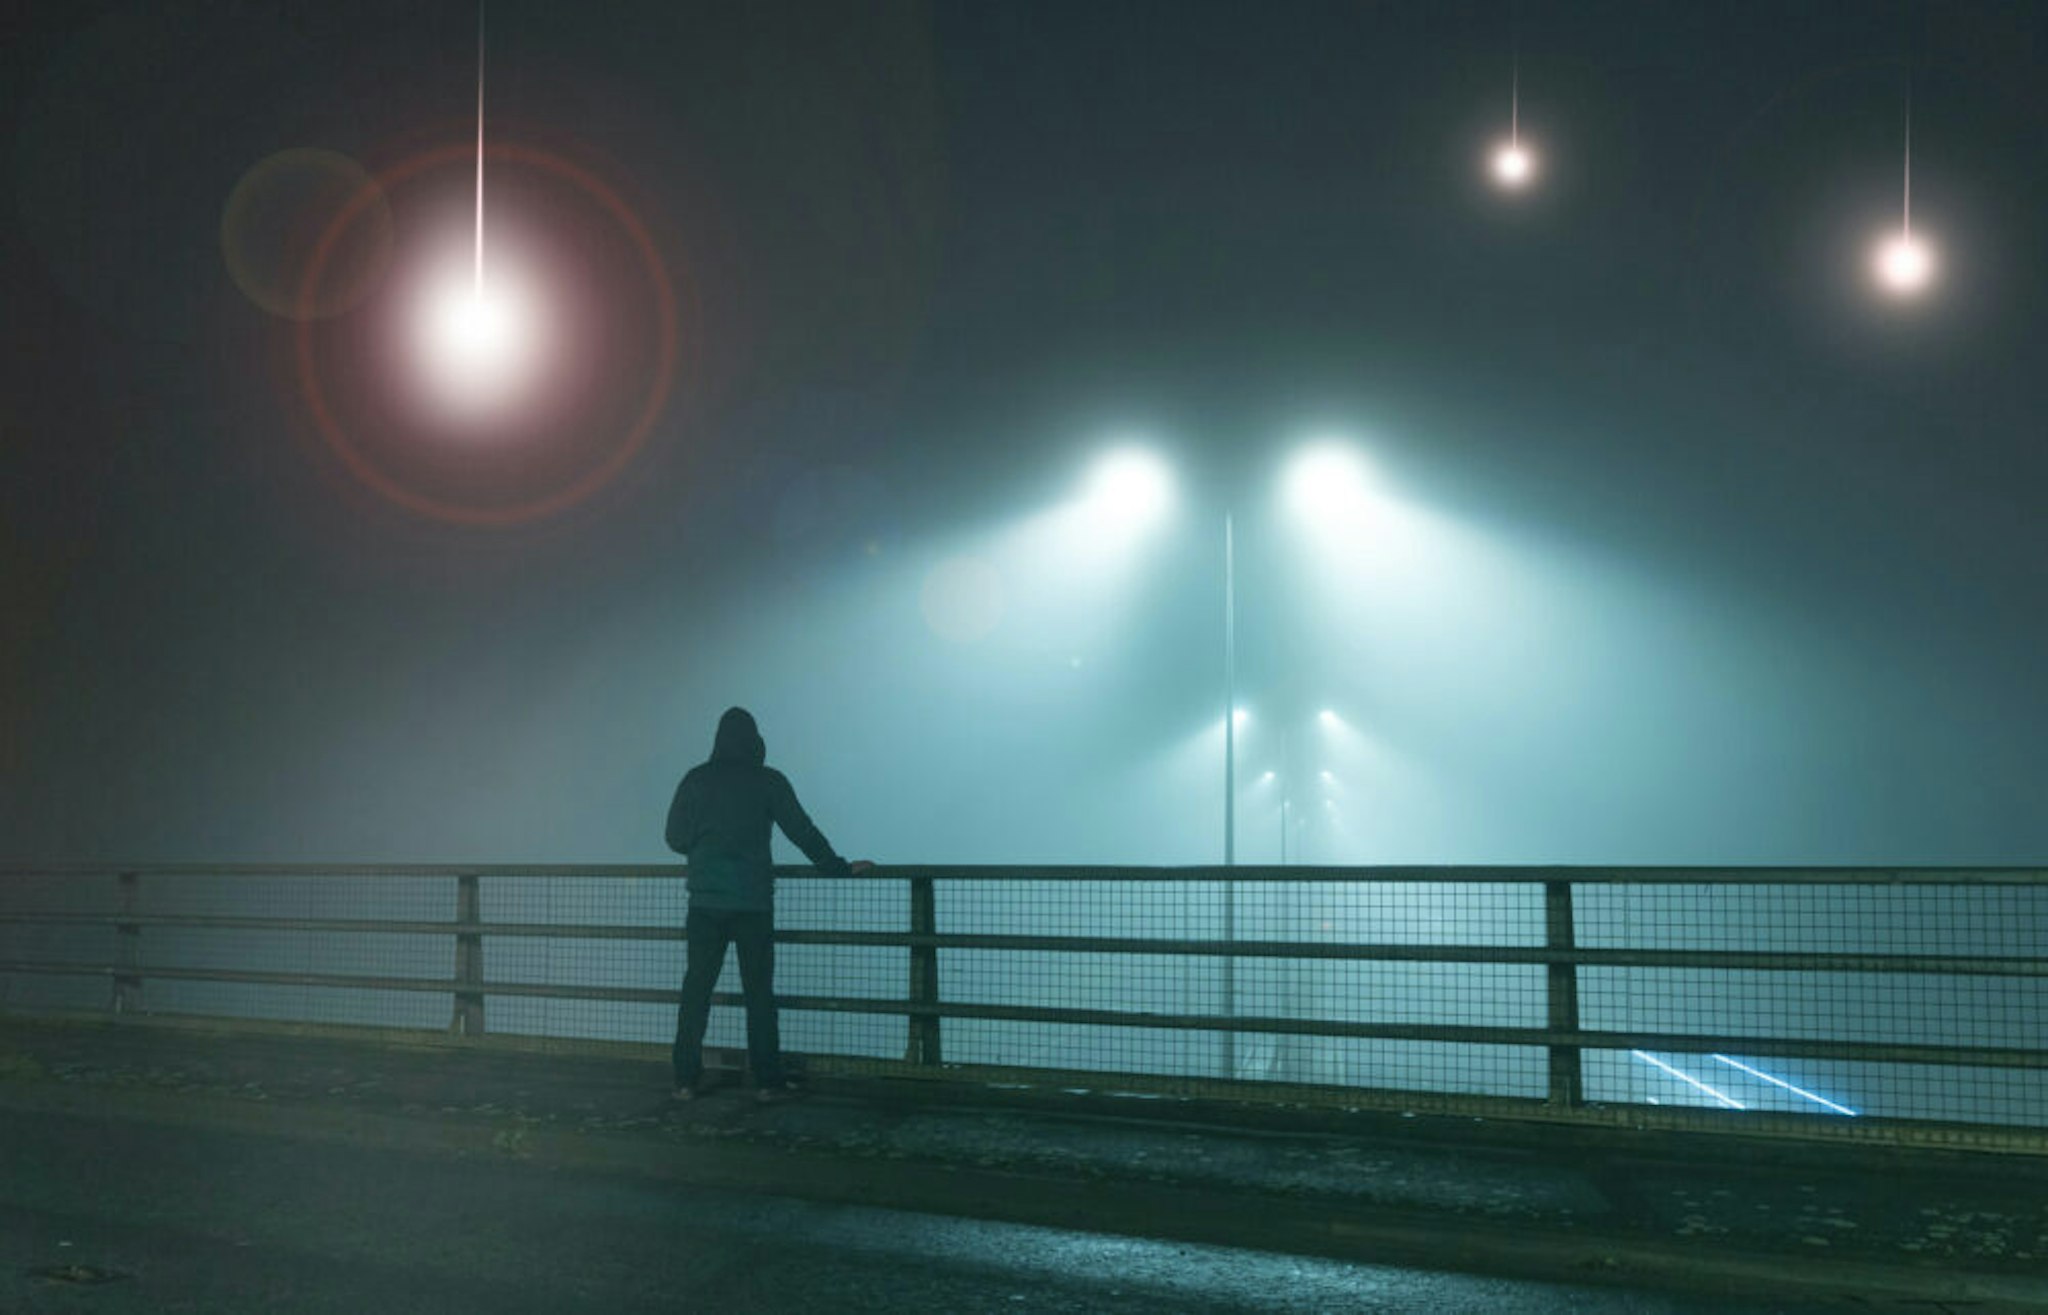 A hooded figure, standing with back to camera on a bridge, looking at UFO alien spaceships coming downfrom the sk., Street lights. On a foggy night.